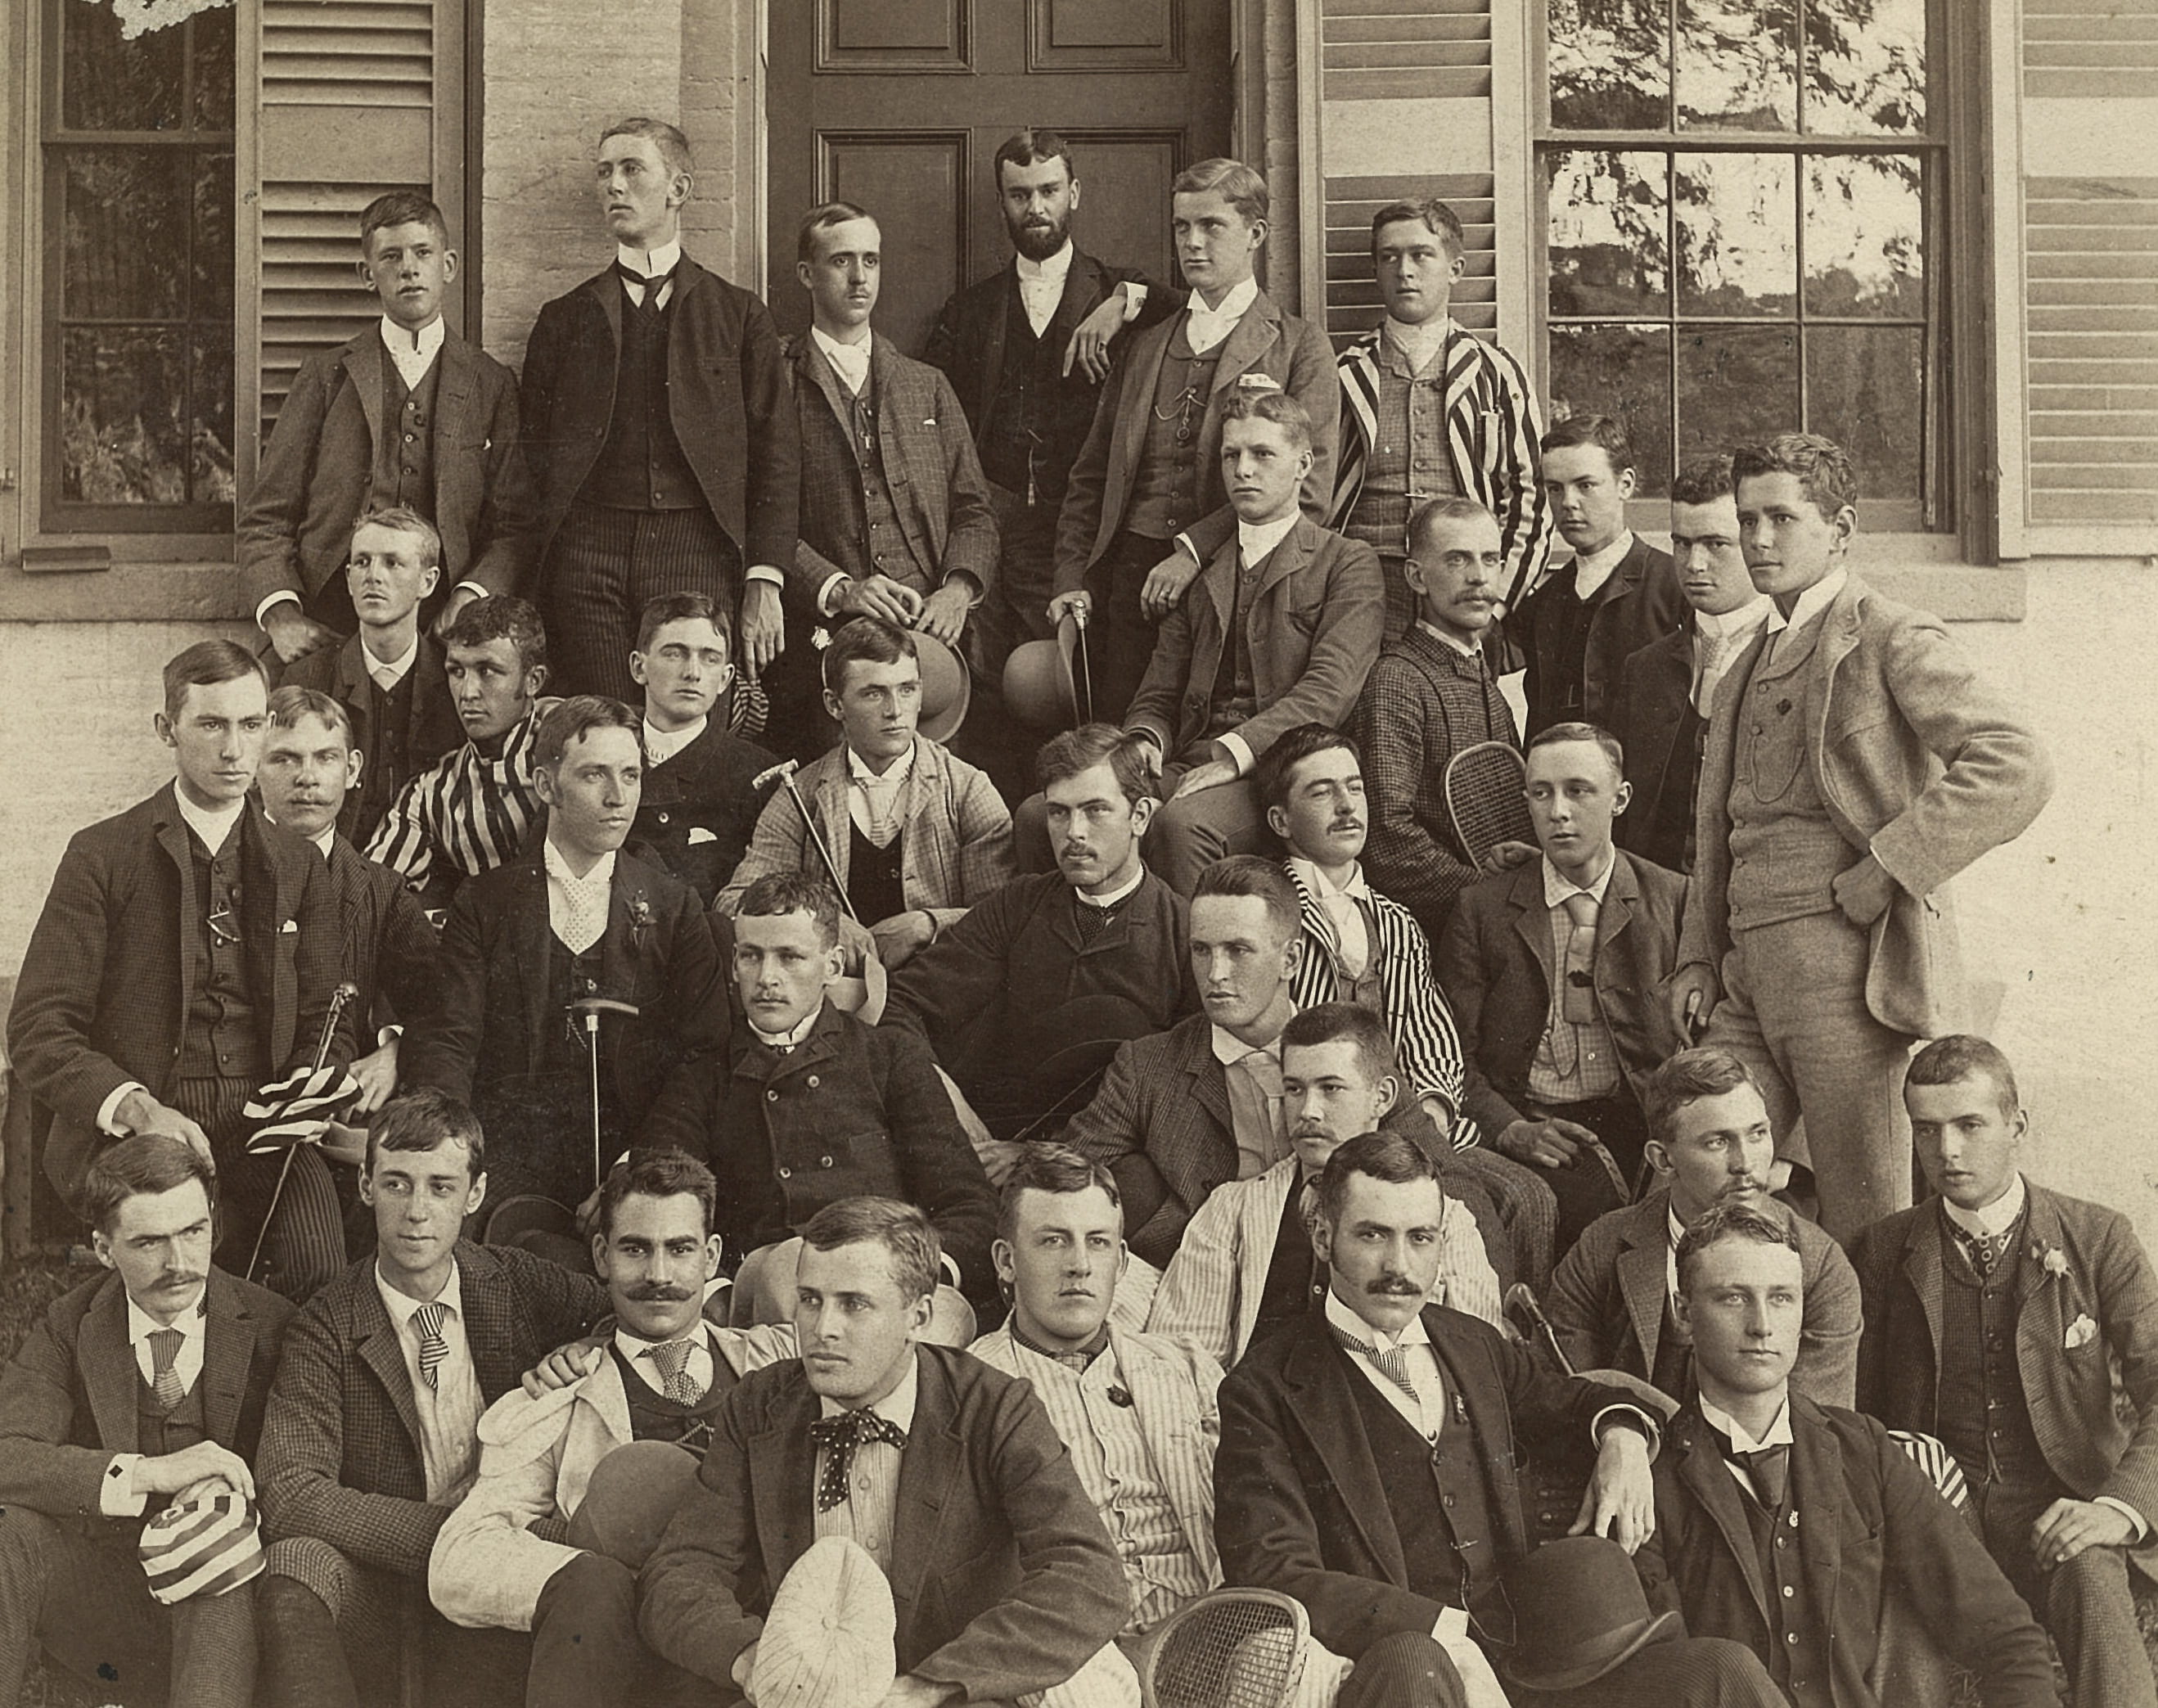 Photograph of a large group of young men in a variety of fashions. Most of the men are looking off the side of the picture with sultry expressions.